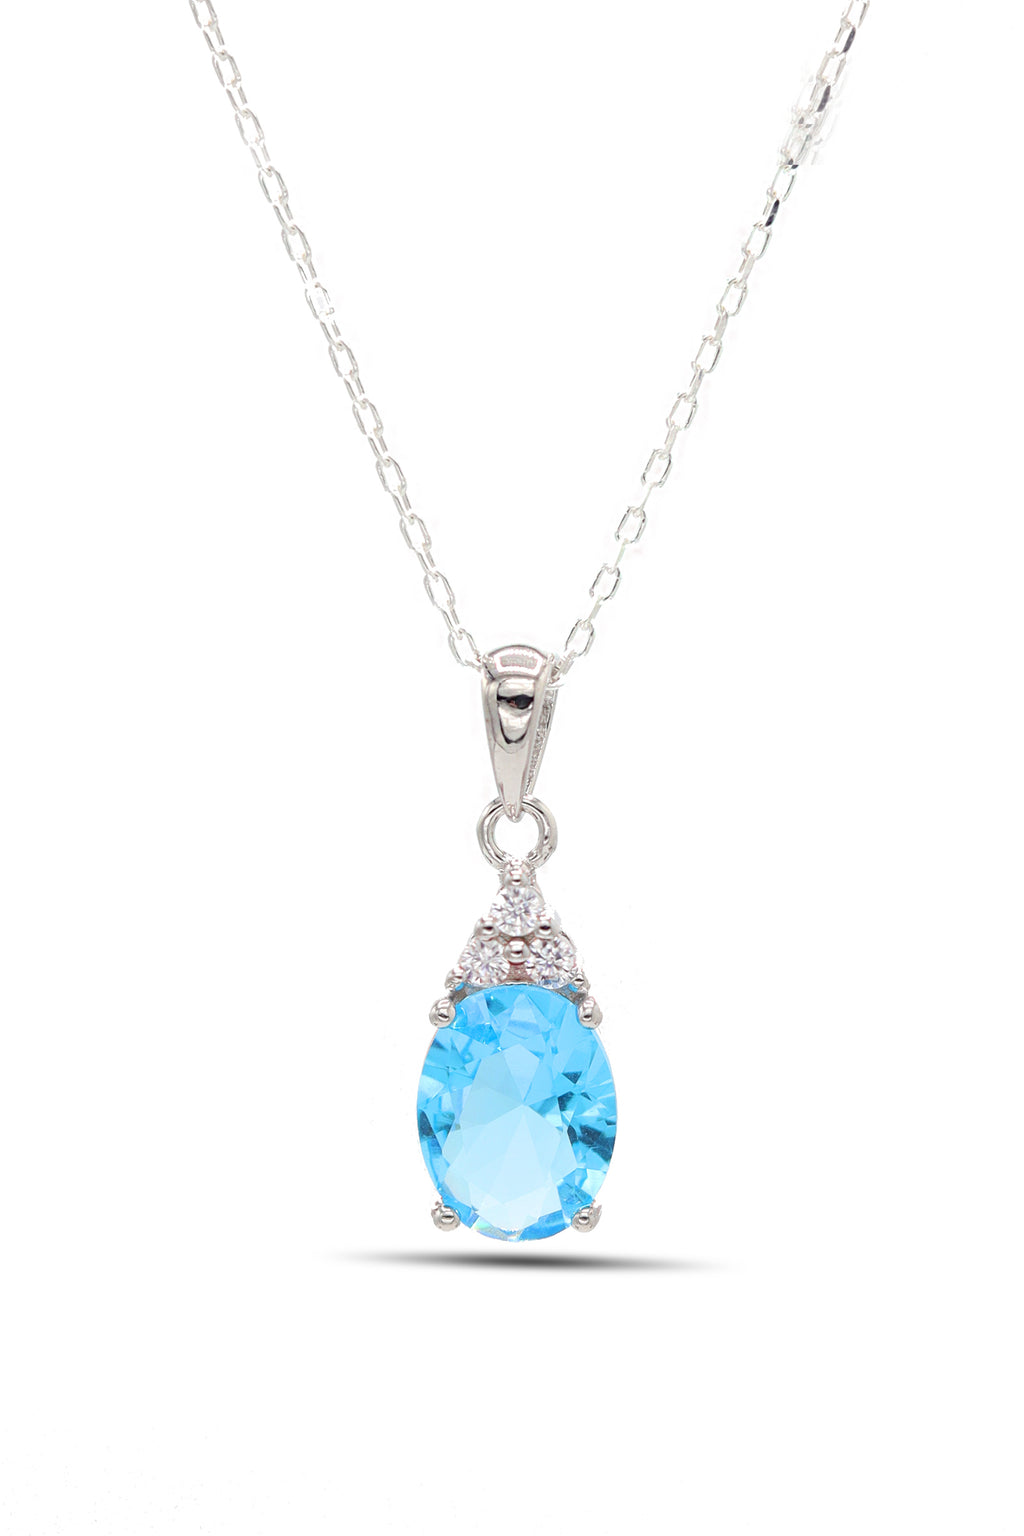 Oval Model Silver Necklace With Aquamarine and Zircon (NG201021901)